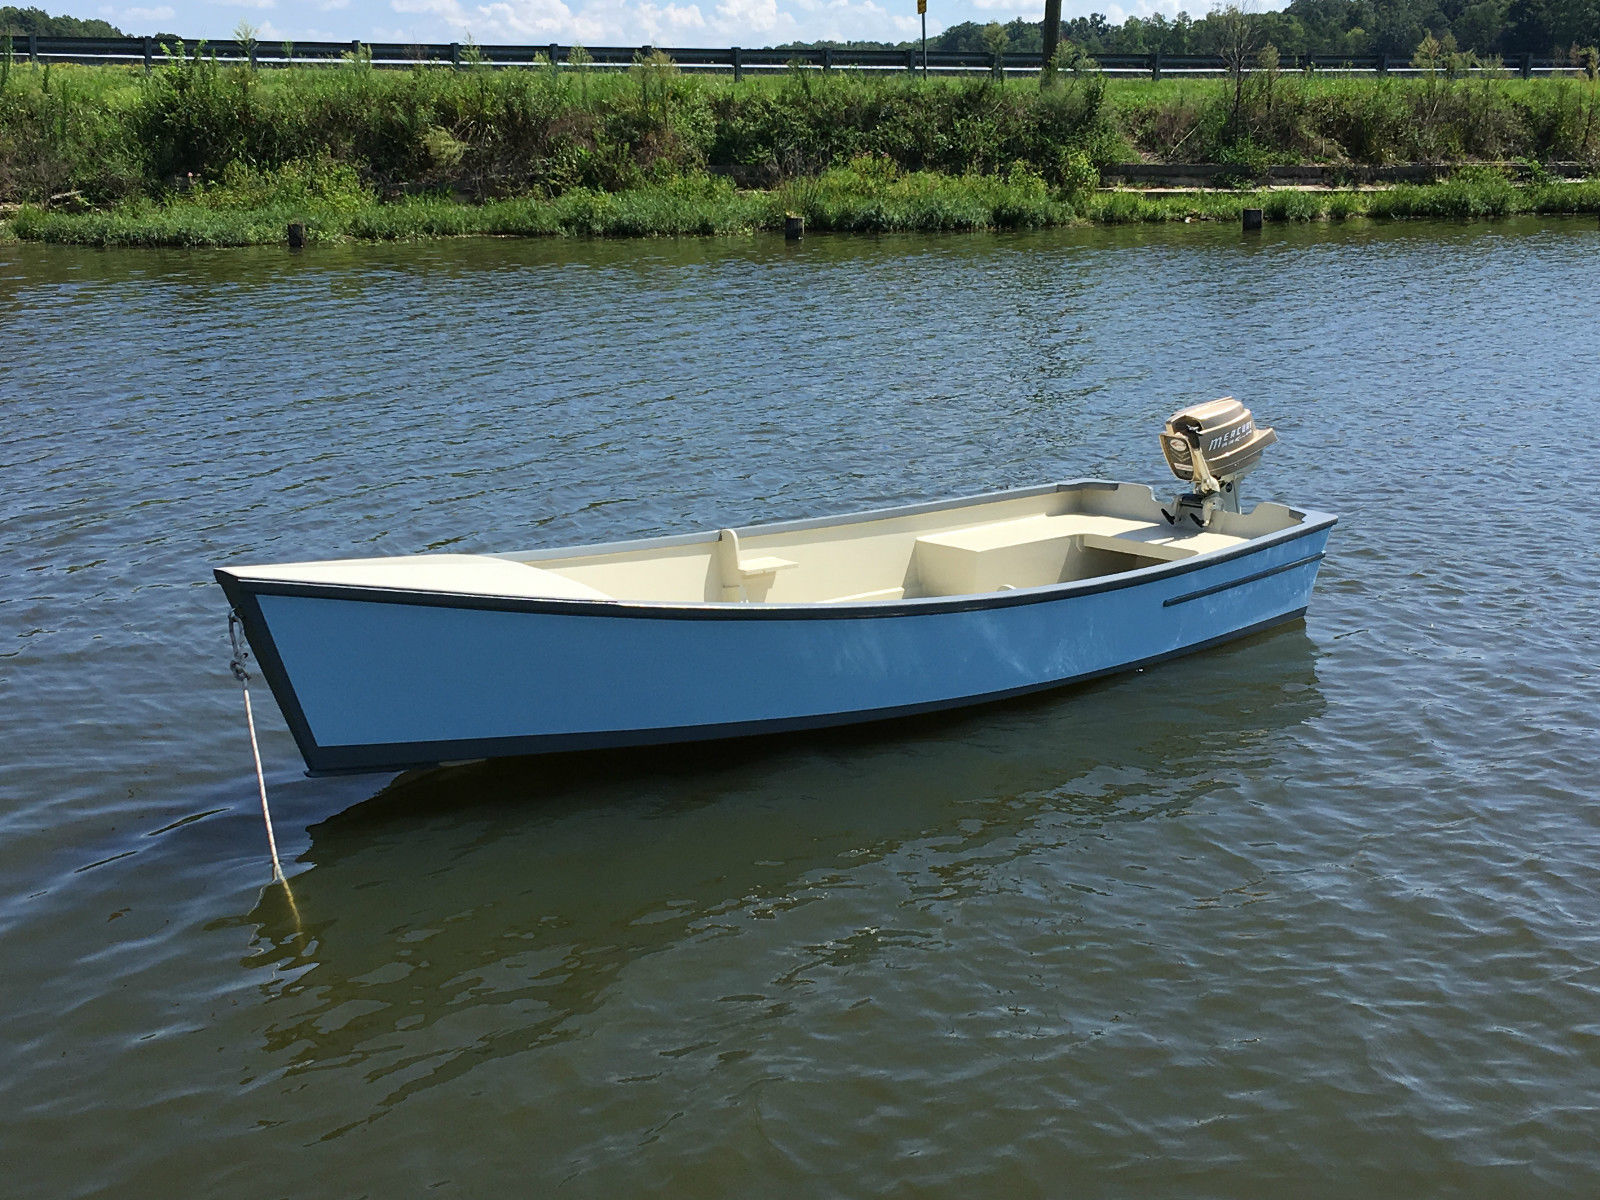 harkers island skiff 1969 for sale for ,000 - boats-from